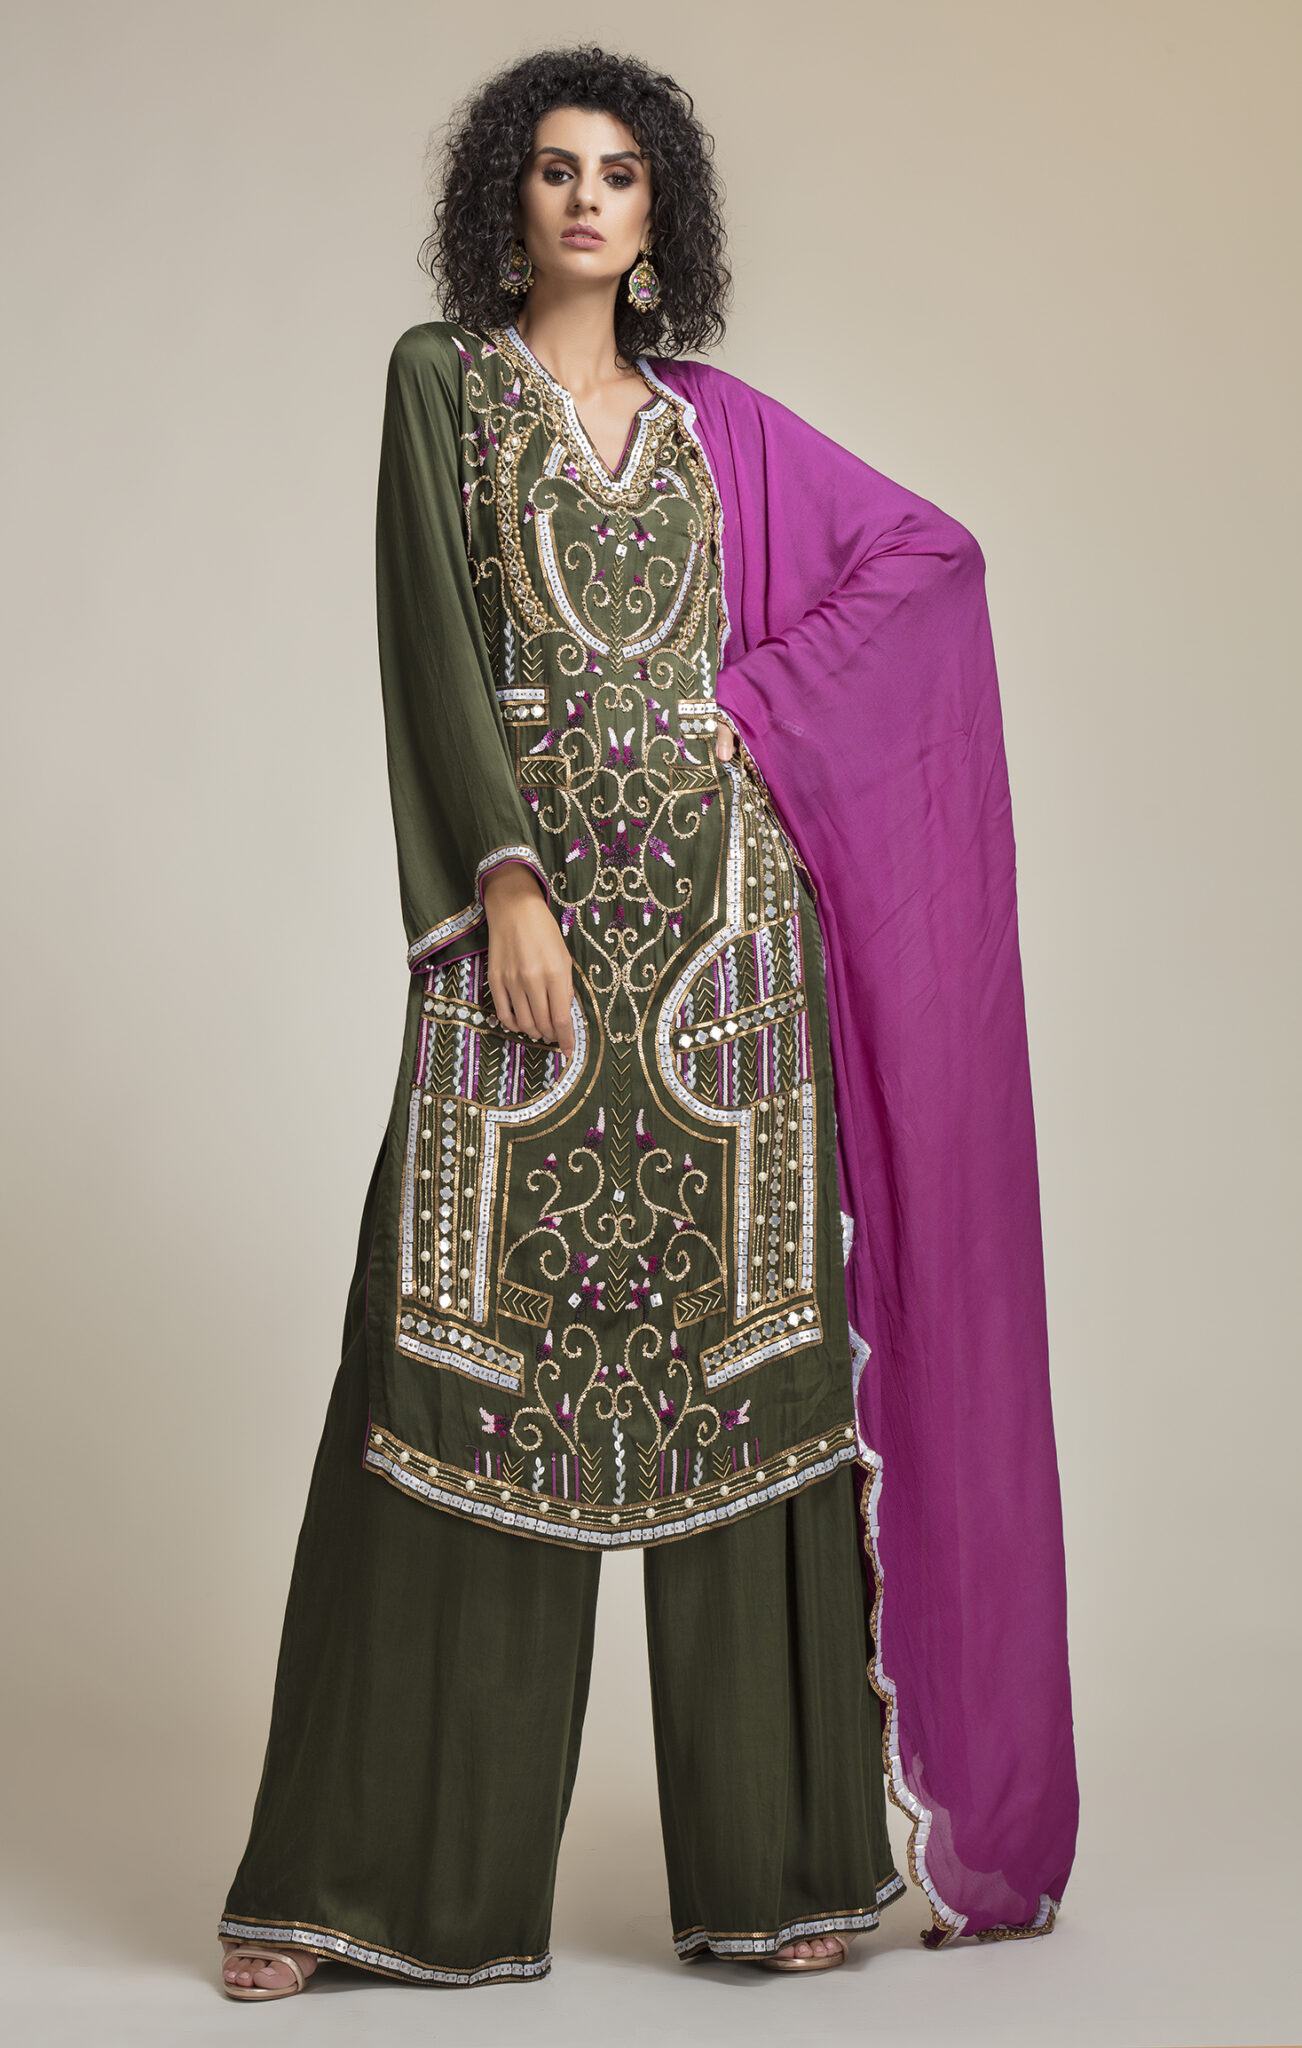 Buy Designer Silk Embroidered Suit at Folklore in India - Canada | Folklore Collections - 2, Fashion designer clothing women designer clothing, women clothing online, designer clothes on sale, designer sale canada, designer clothes toronto, popular clothing stores in toronto